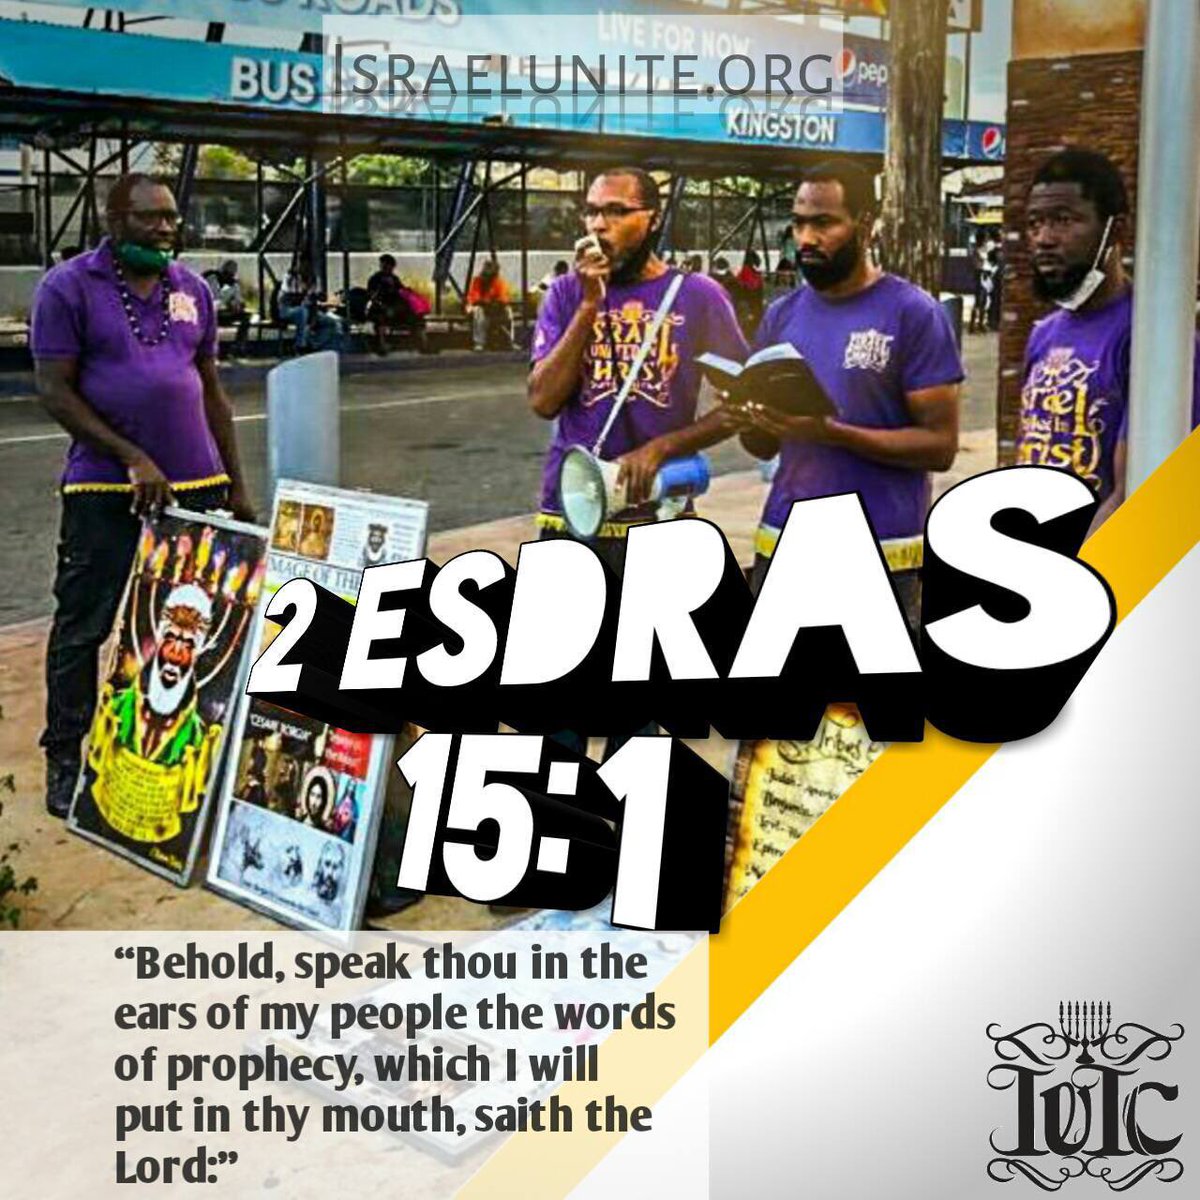 IUIC Jamaica is on a mission to reach the people of Jamaica in every nook and cranny.

Look out for us in #StCatherine, #Portland, #OchiRios, #Trelawny, #MontegoBay, #Mandeville and #Clarendon